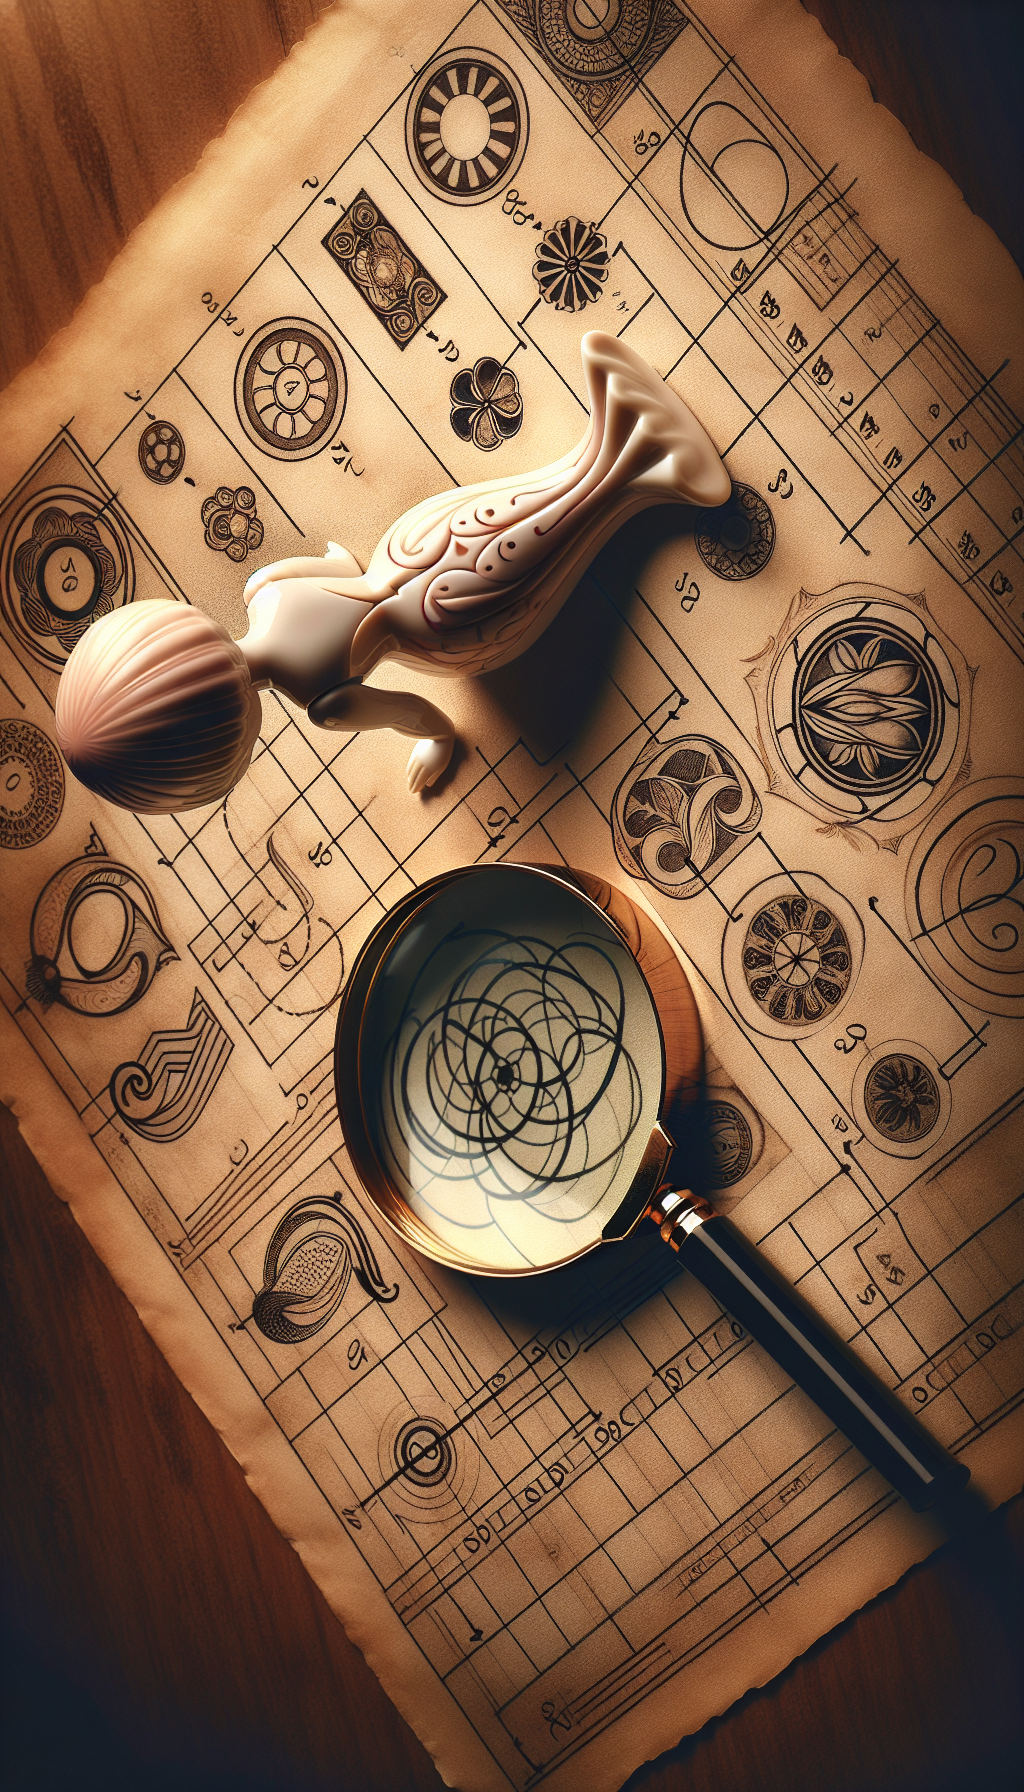 An illustration depicts a magnifying glass poised over a classic porcelain doll lying on an antique parchment covered in sketched date markings. Through the lens, numbers on the doll's nape are magnified, with style variations ranging from elegant Art Nouveau digits to bold Art Deco lines, symbolizing a timeline of historical design, suggesting the process of identifying and dating the doll via its unique markings.